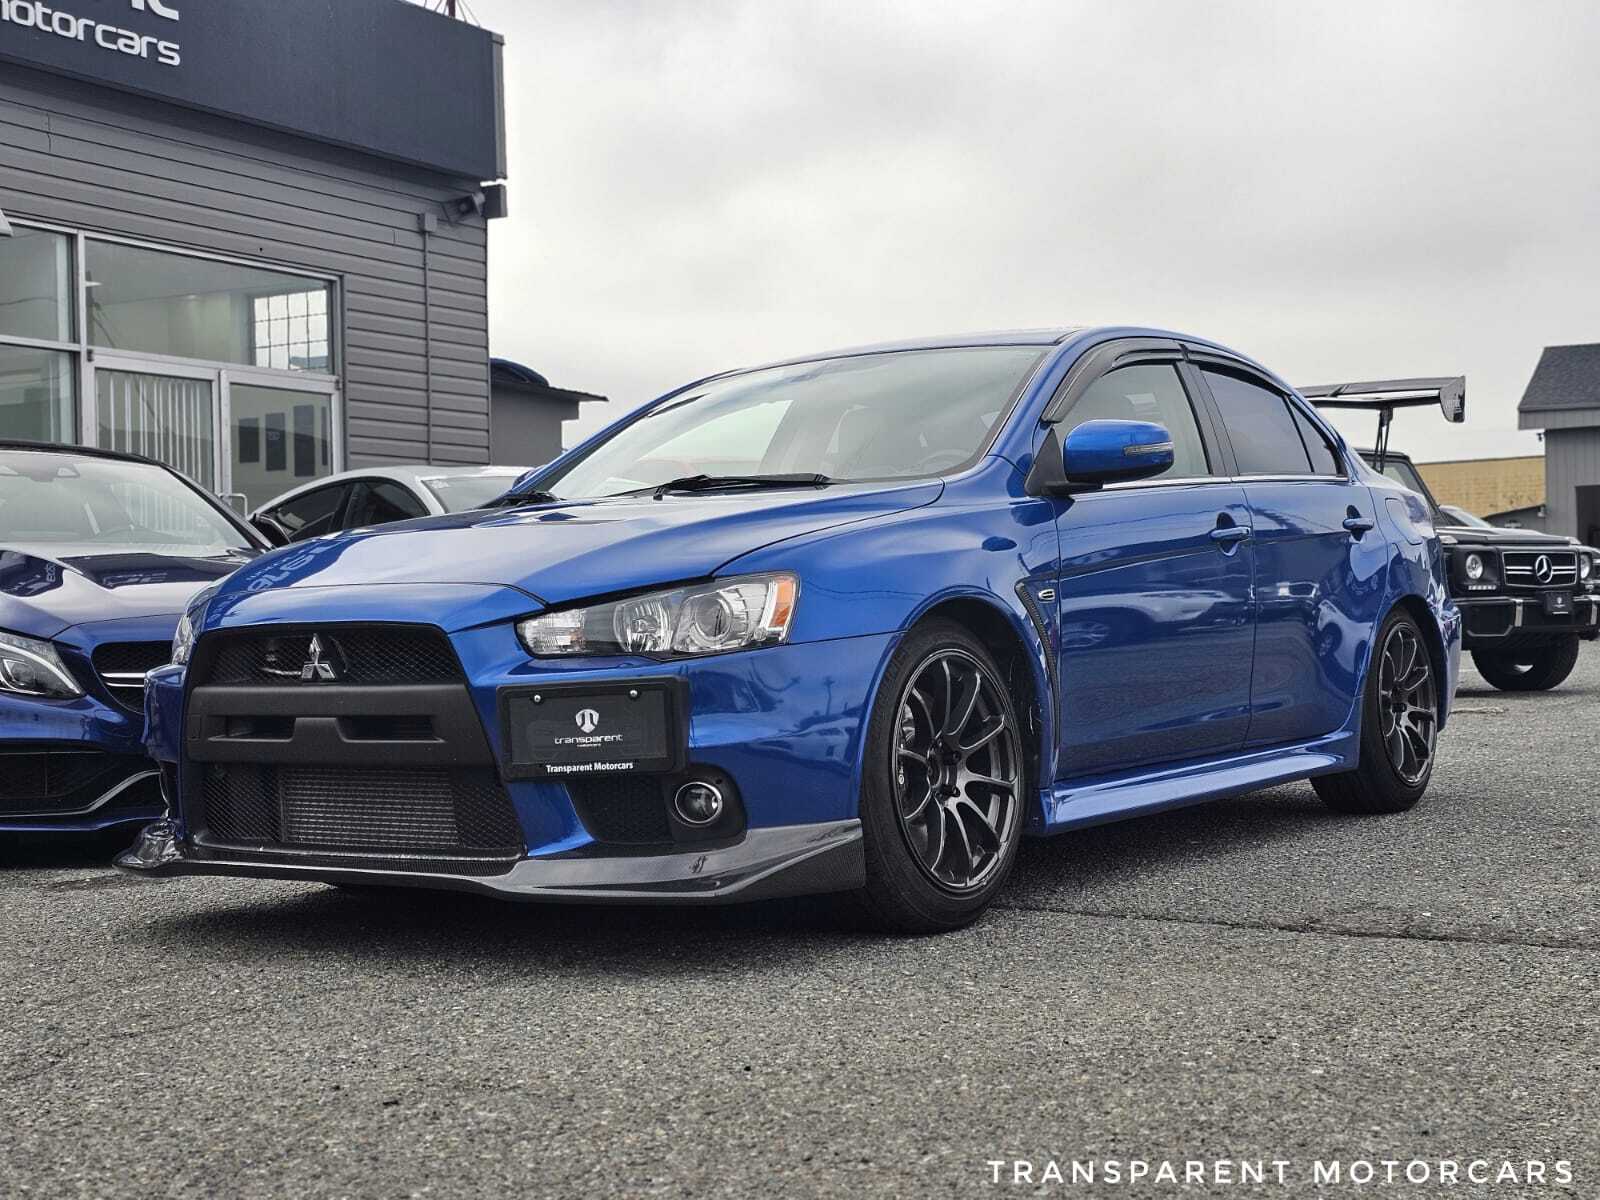 2015 Mitsubishi LANCER EVOLUTION 4WD/Modifications/Low Kms/Clean Carfax/Manual